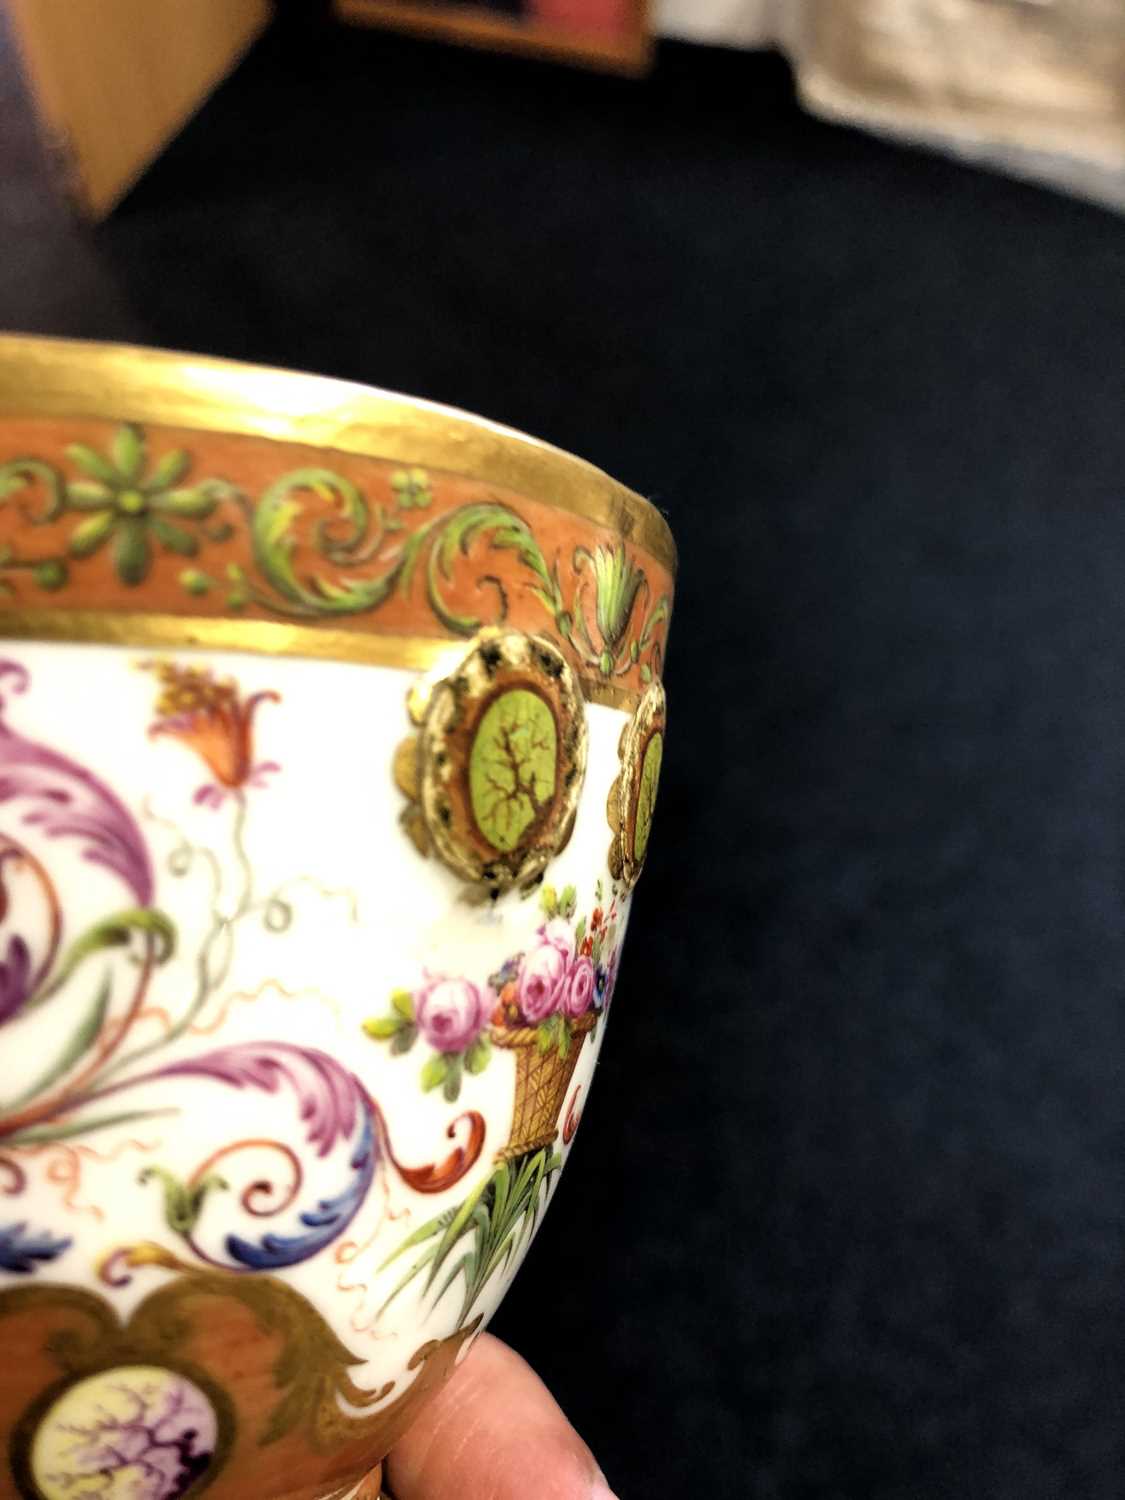 A late 18th century Serves two handled cup, with a raised central band decorated with roses and - Image 10 of 14